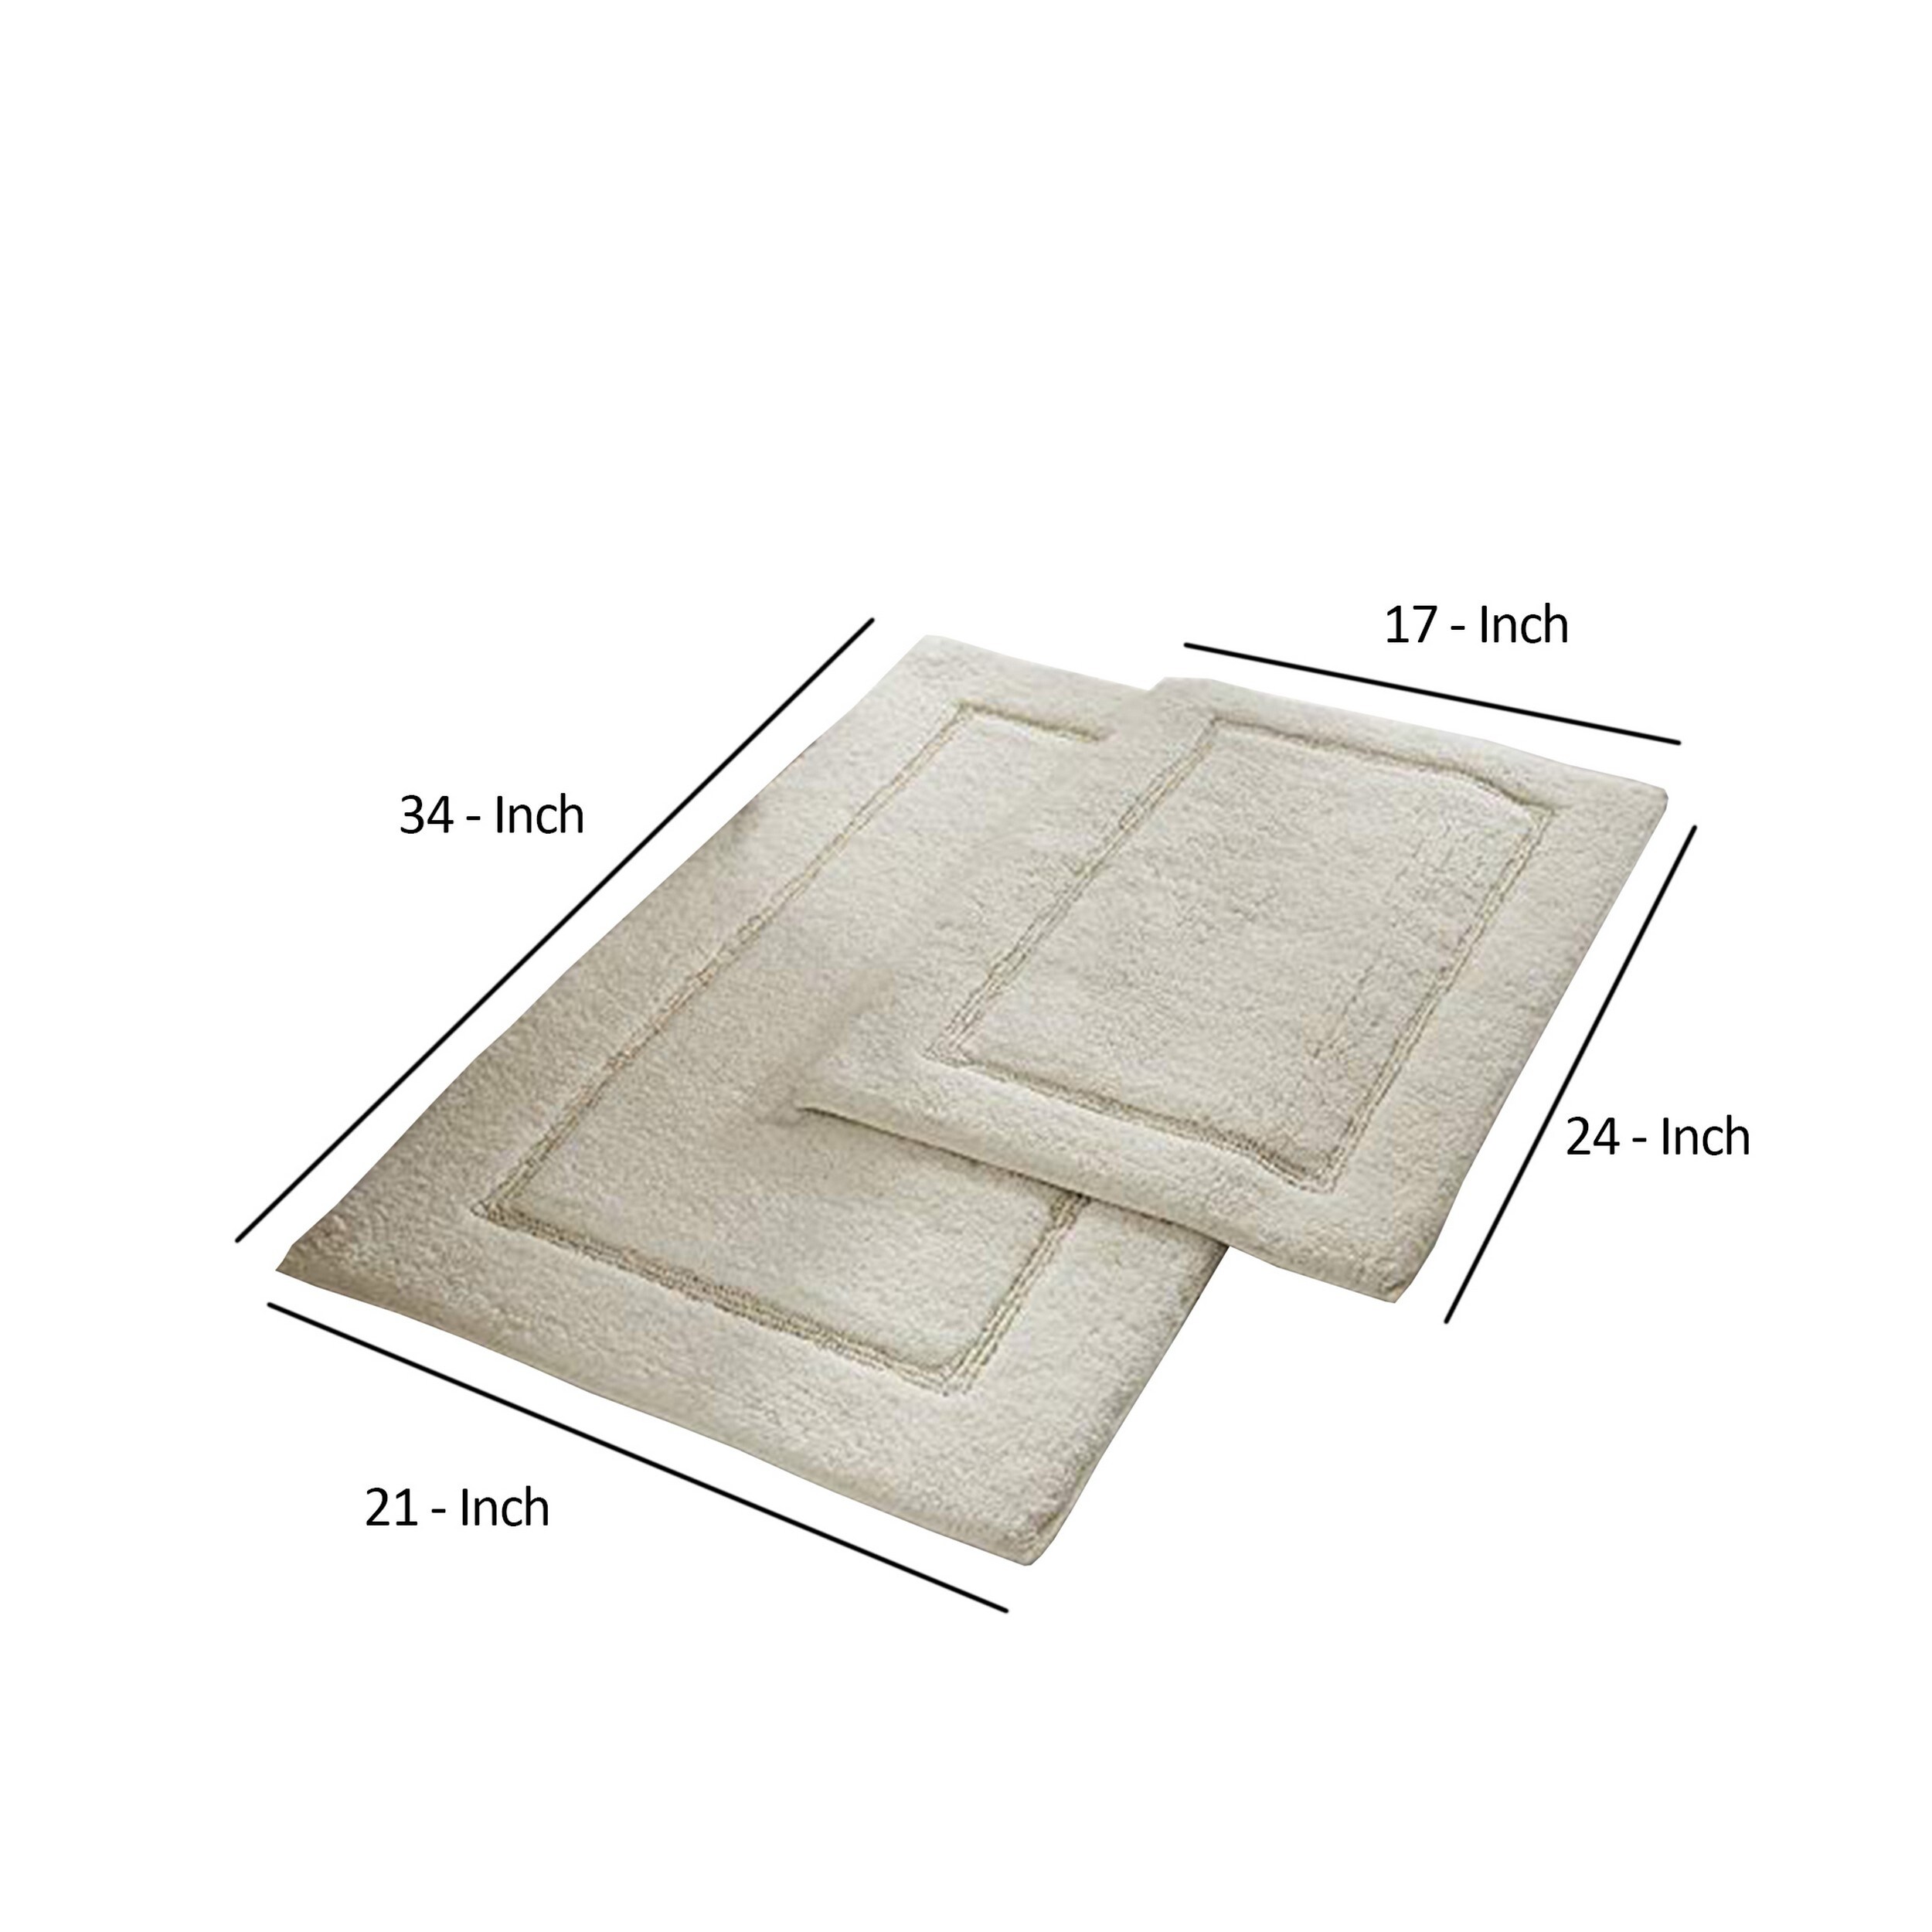 https://ak1.ostkcdn.com/images/products/is/images/direct/9ce1e798217d45e6442ad2332b9e2e6a28ad4785/Nantes-2-Piece-Fabric-Bath-Mat-with-Non-Slippery-Back-The-Urban-Port%2C-Off-white.jpg